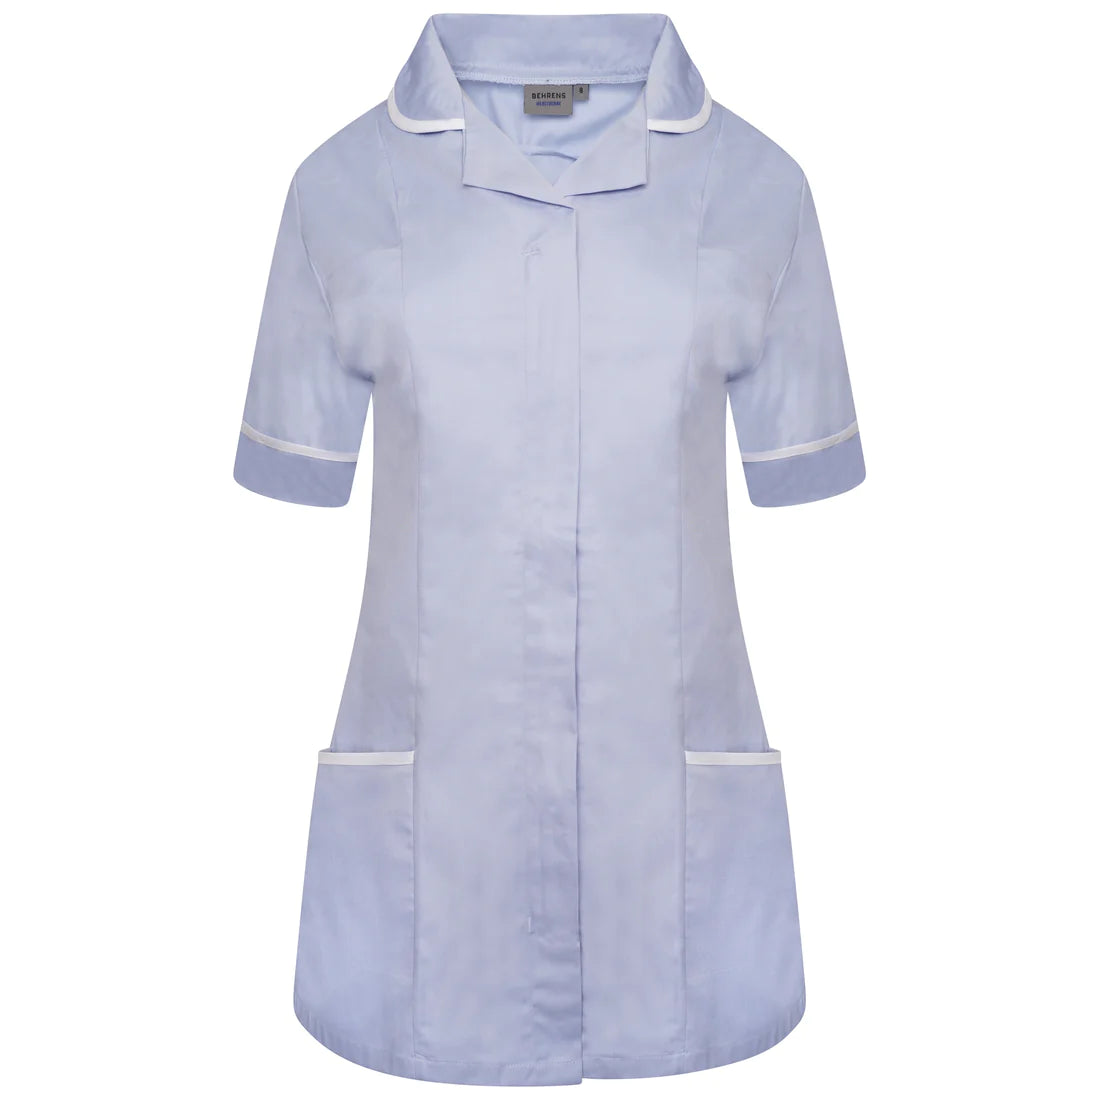 Sky/White Contrast Ladies Tunic with Round Collar - NCLTPS